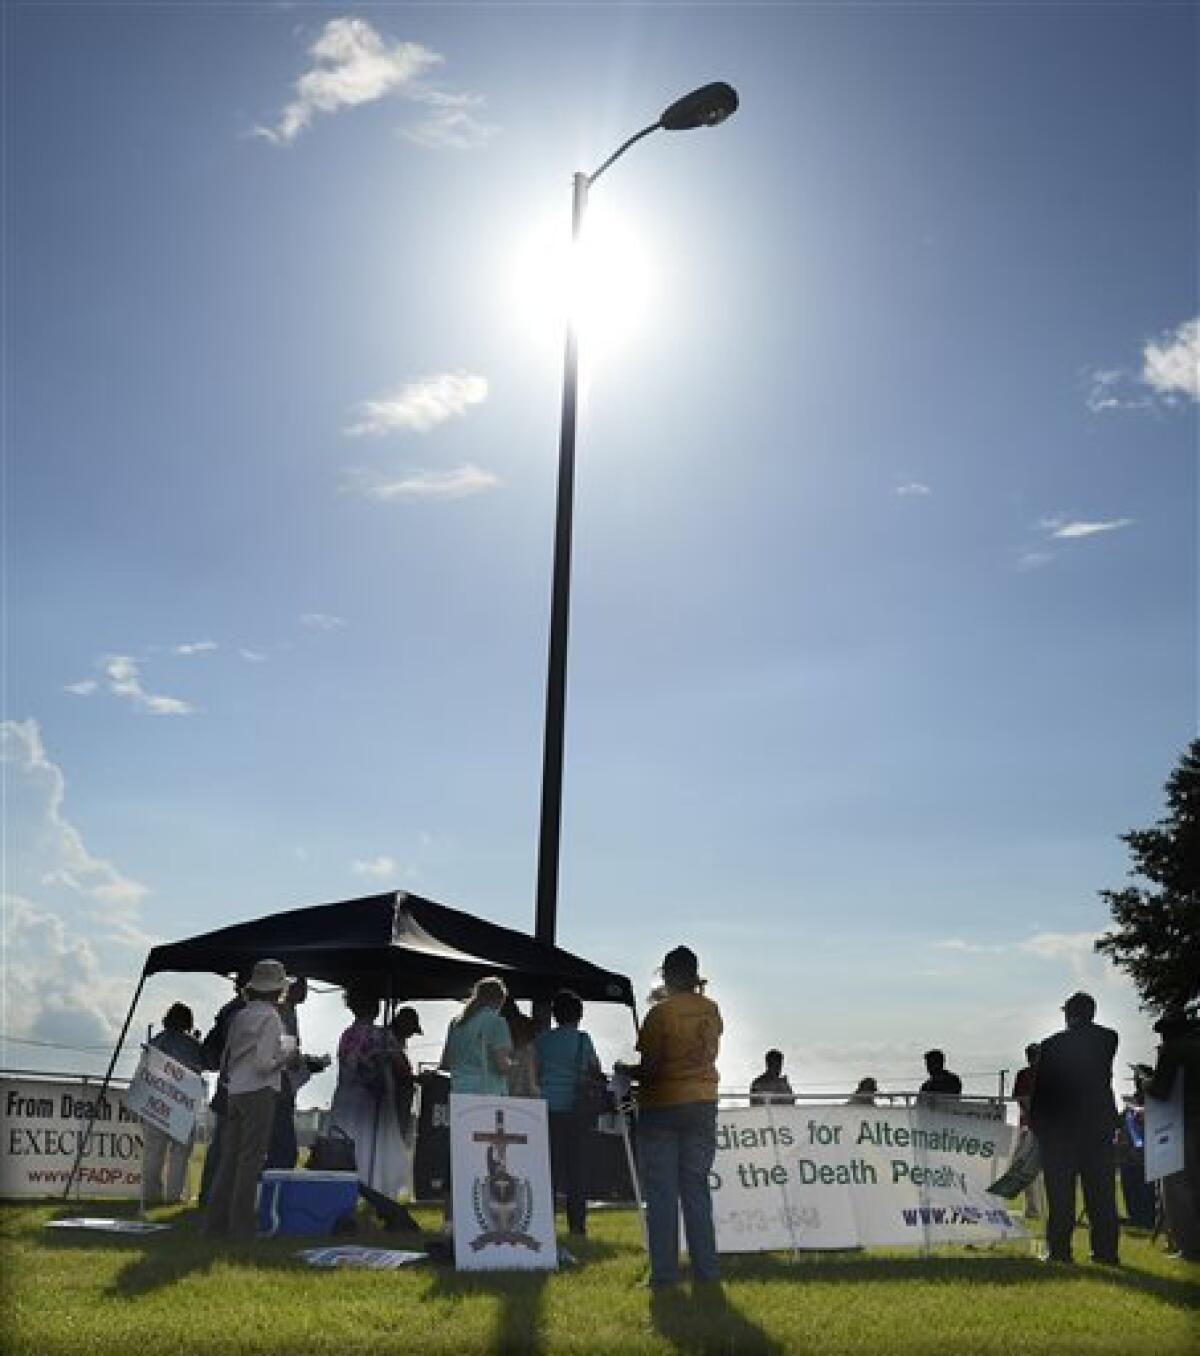 Protesters against the death penalty demonstrate in front of the Florida State Prison near Starke, Fla. Wednesday, June 18, 2014.